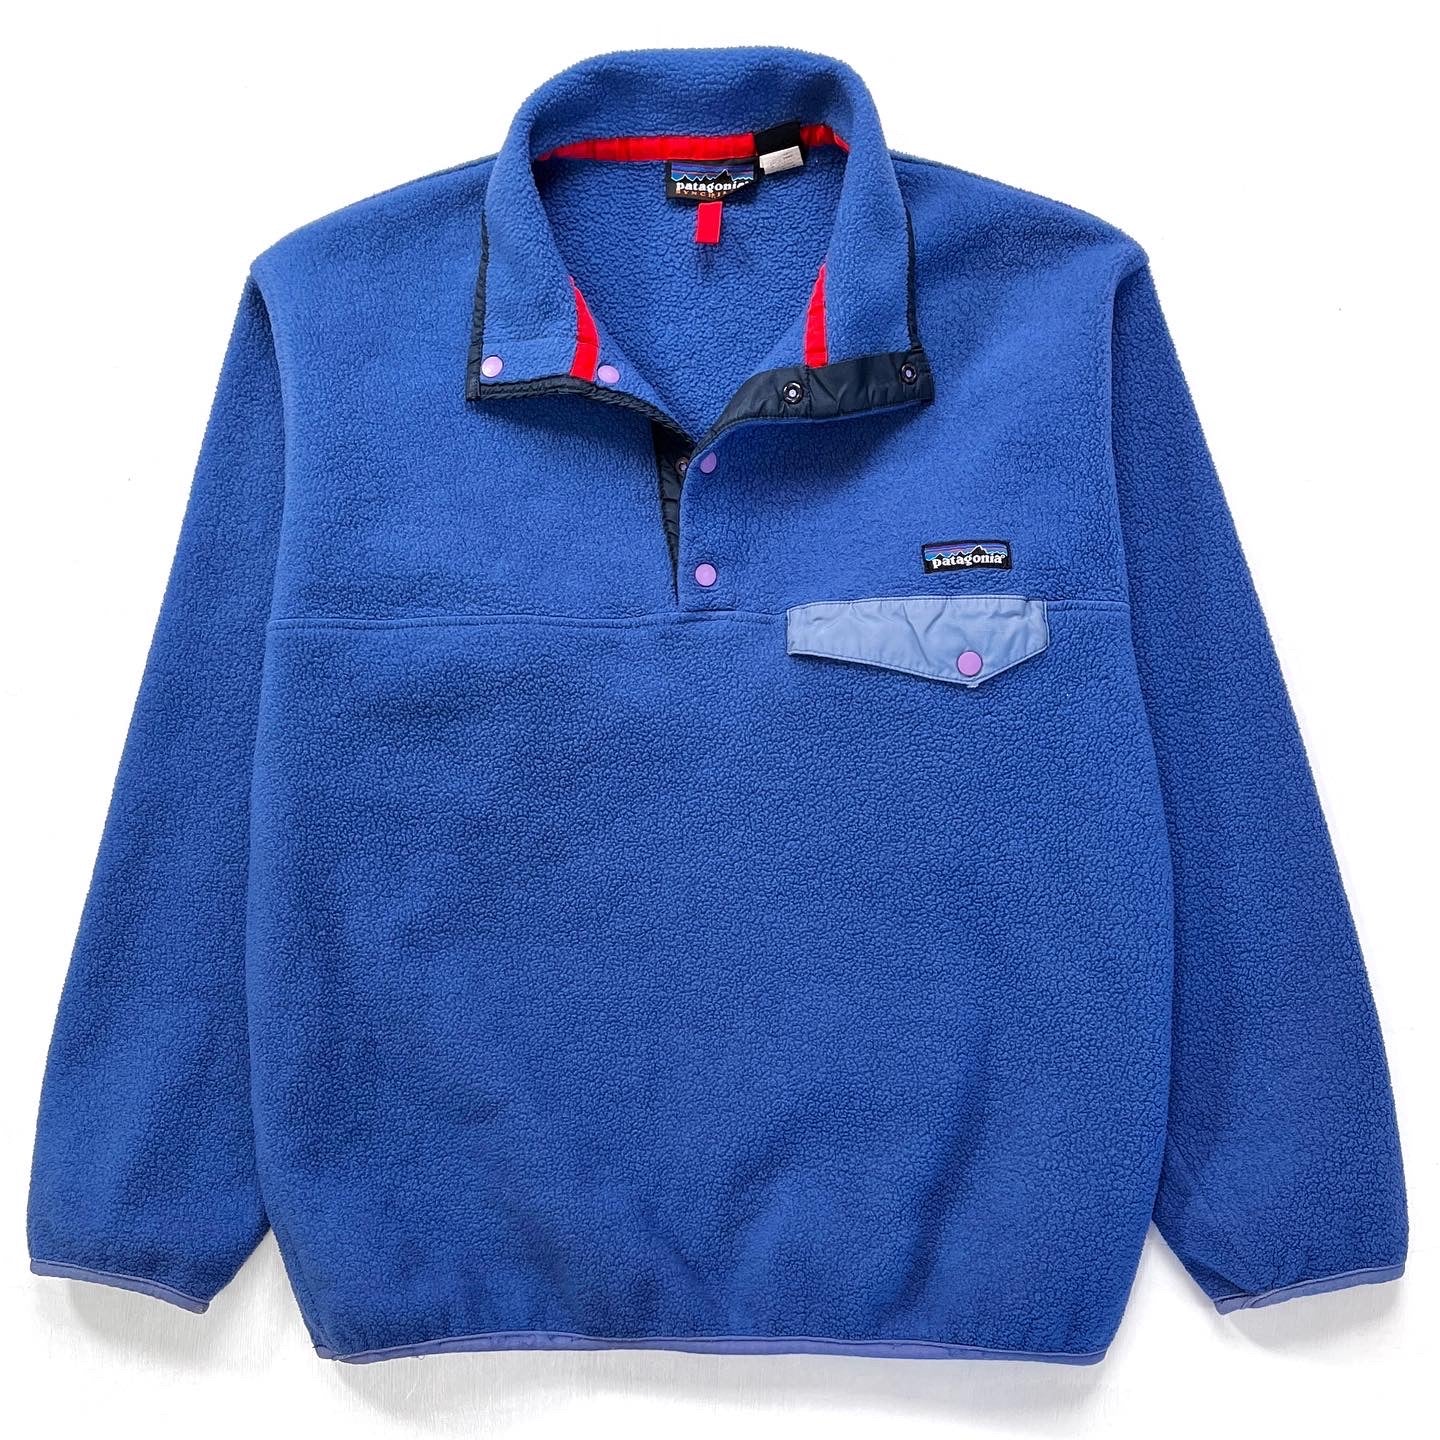 1997 Patagonia Made In The U.S.A. Synchilla Snap-T, True Blue (M)